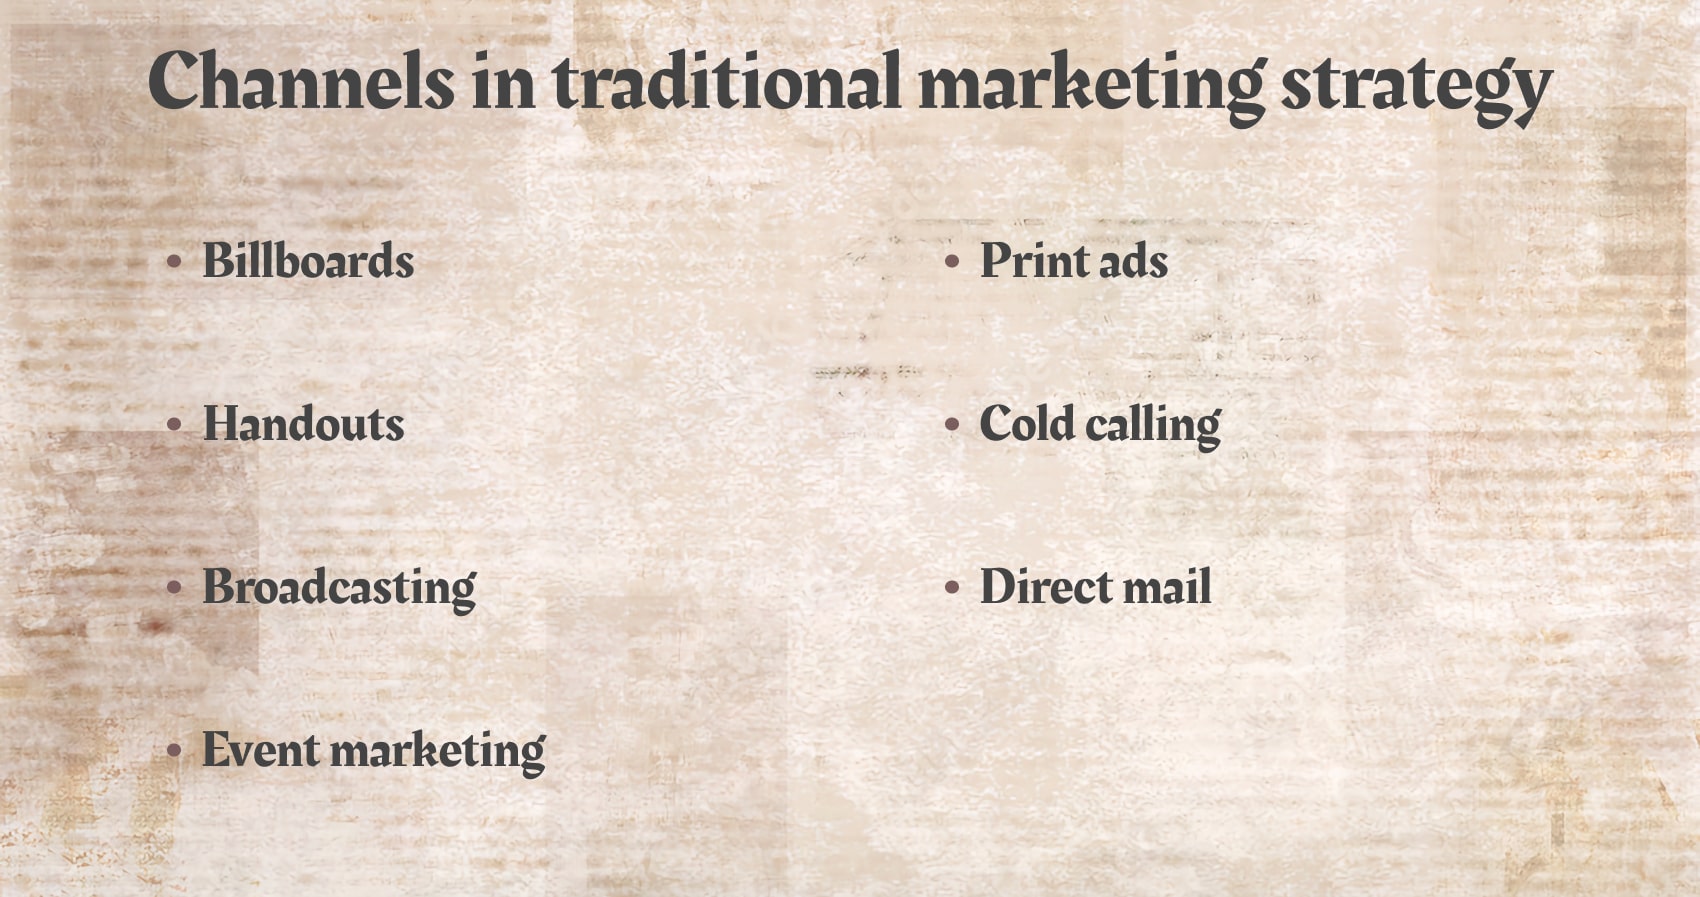 Main channels in traditional marketing